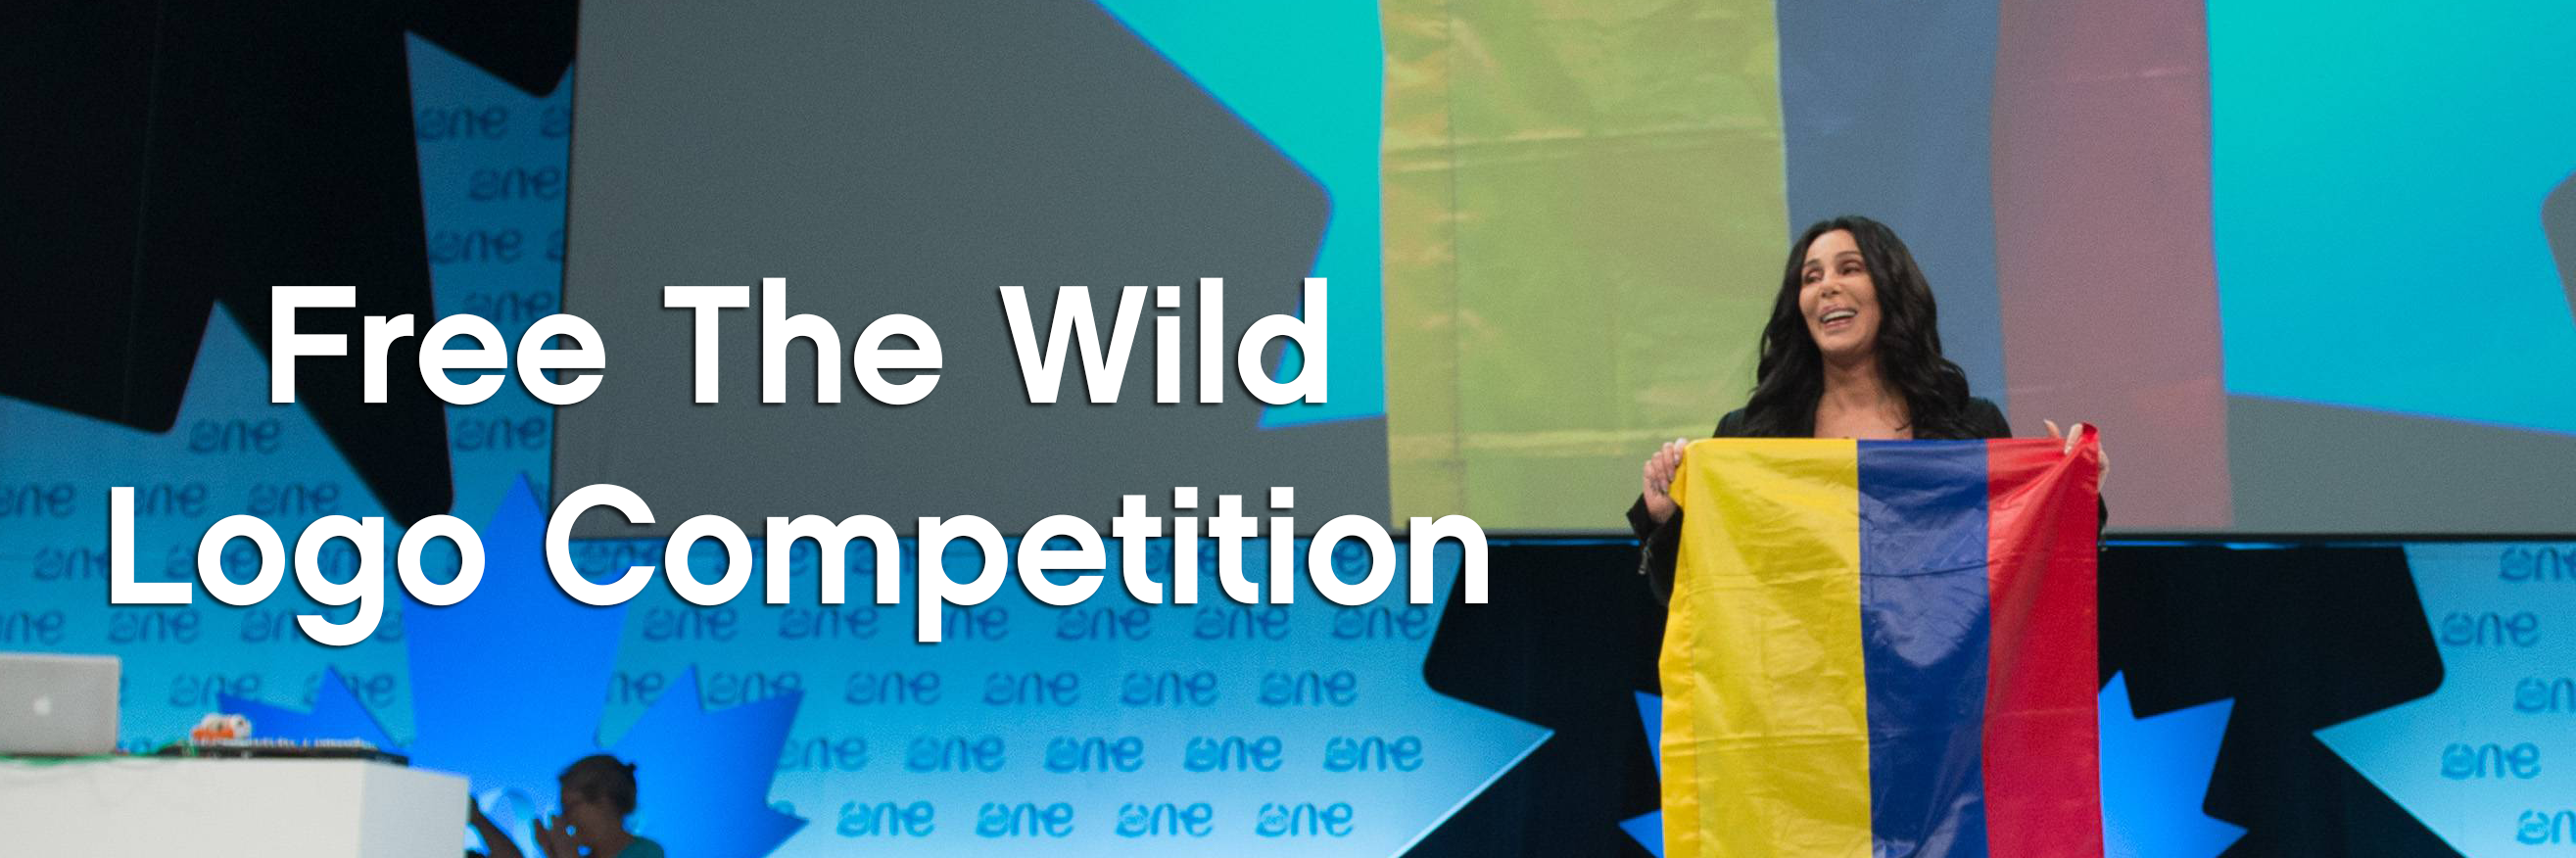 One Young World Free The Wild Logo Competition 2017 (Win Sponsored Trip to OYWS 2018)